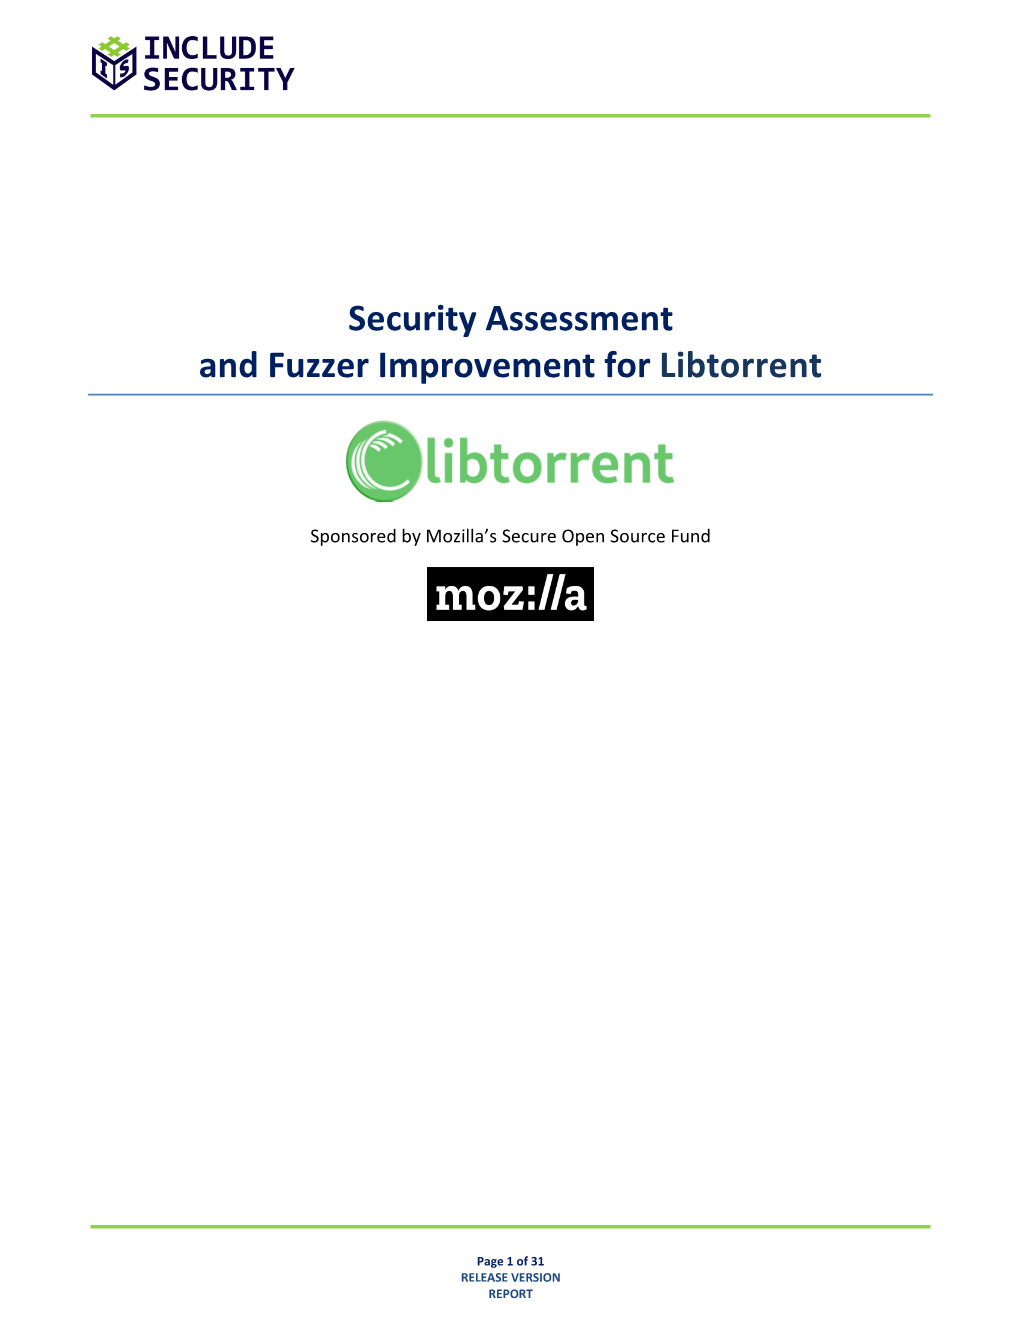 Security Assessment and Fuzzer Improvement for Libtorrent